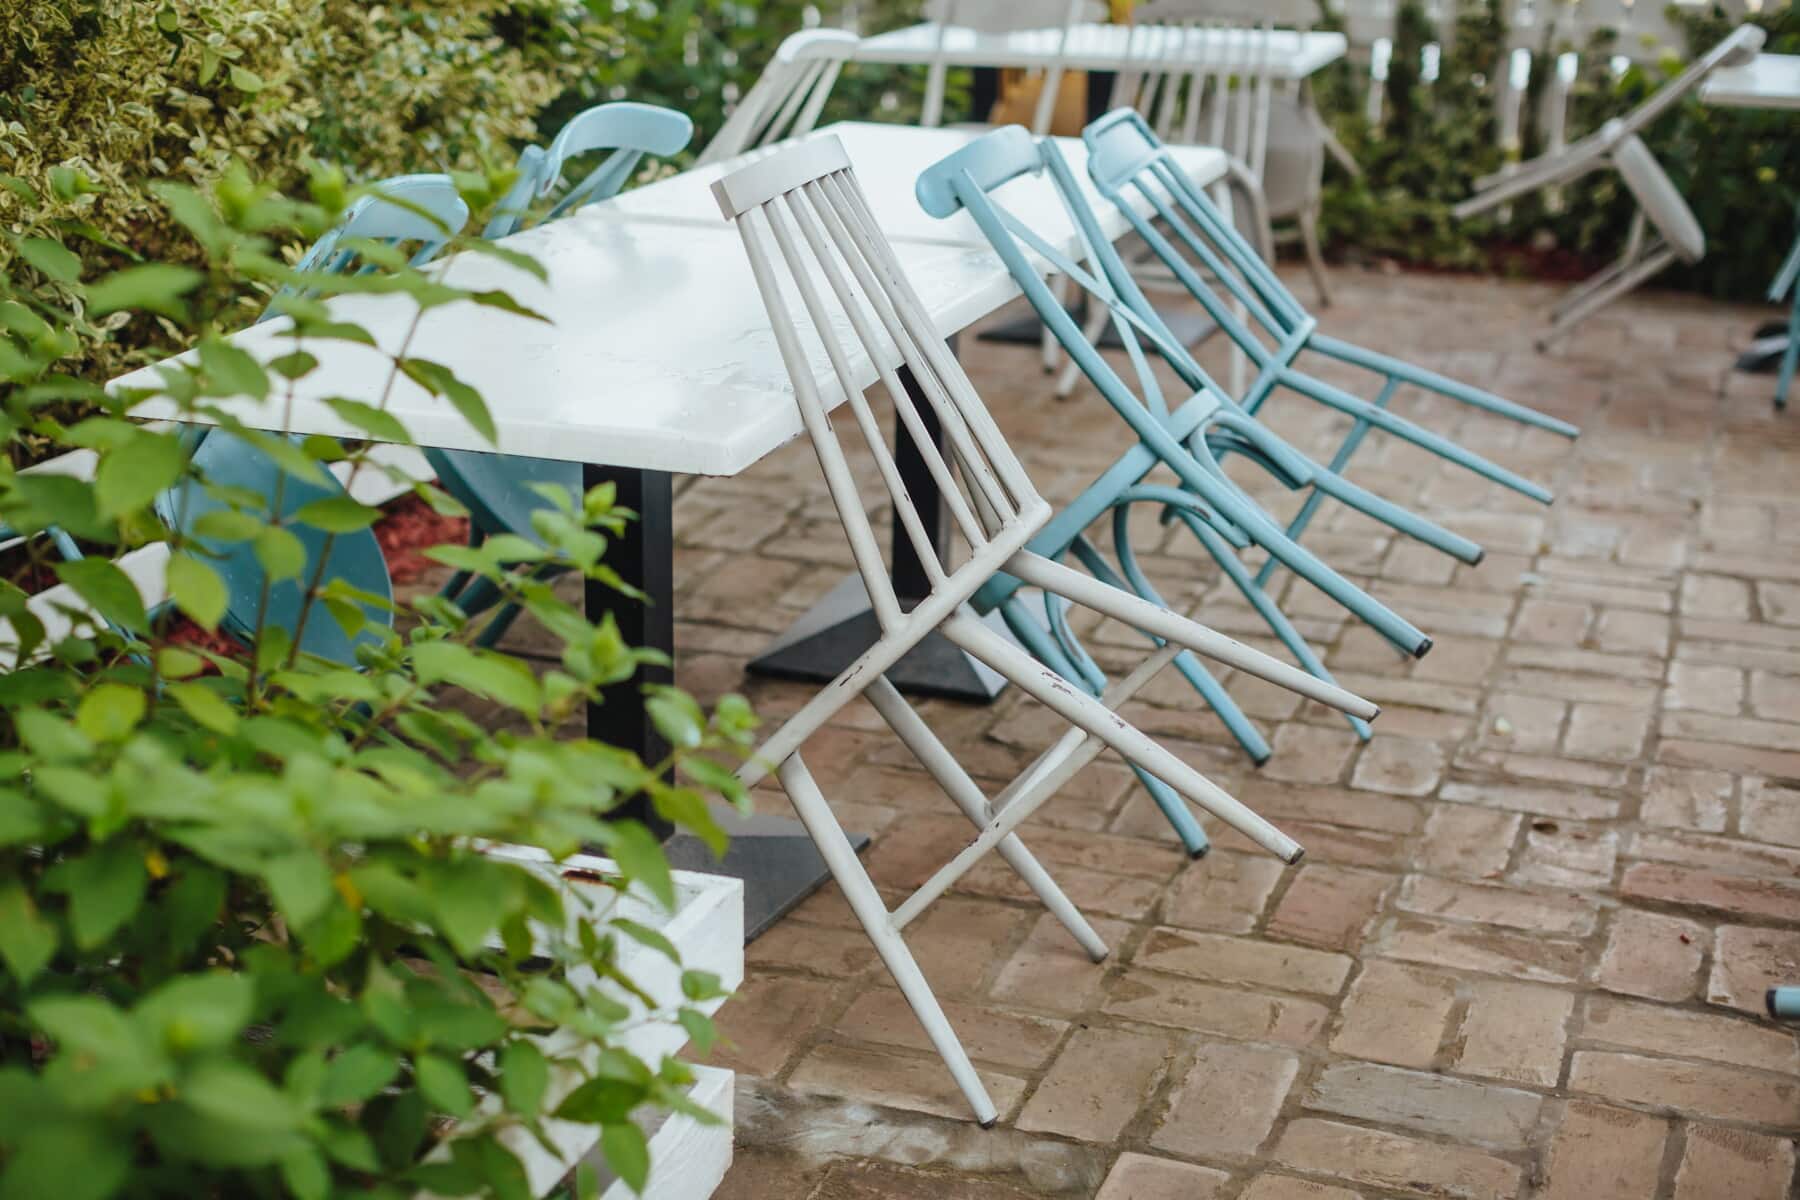 garden, metal, table, chairs, furniture, vintage, seat, chair, patio, outdoors